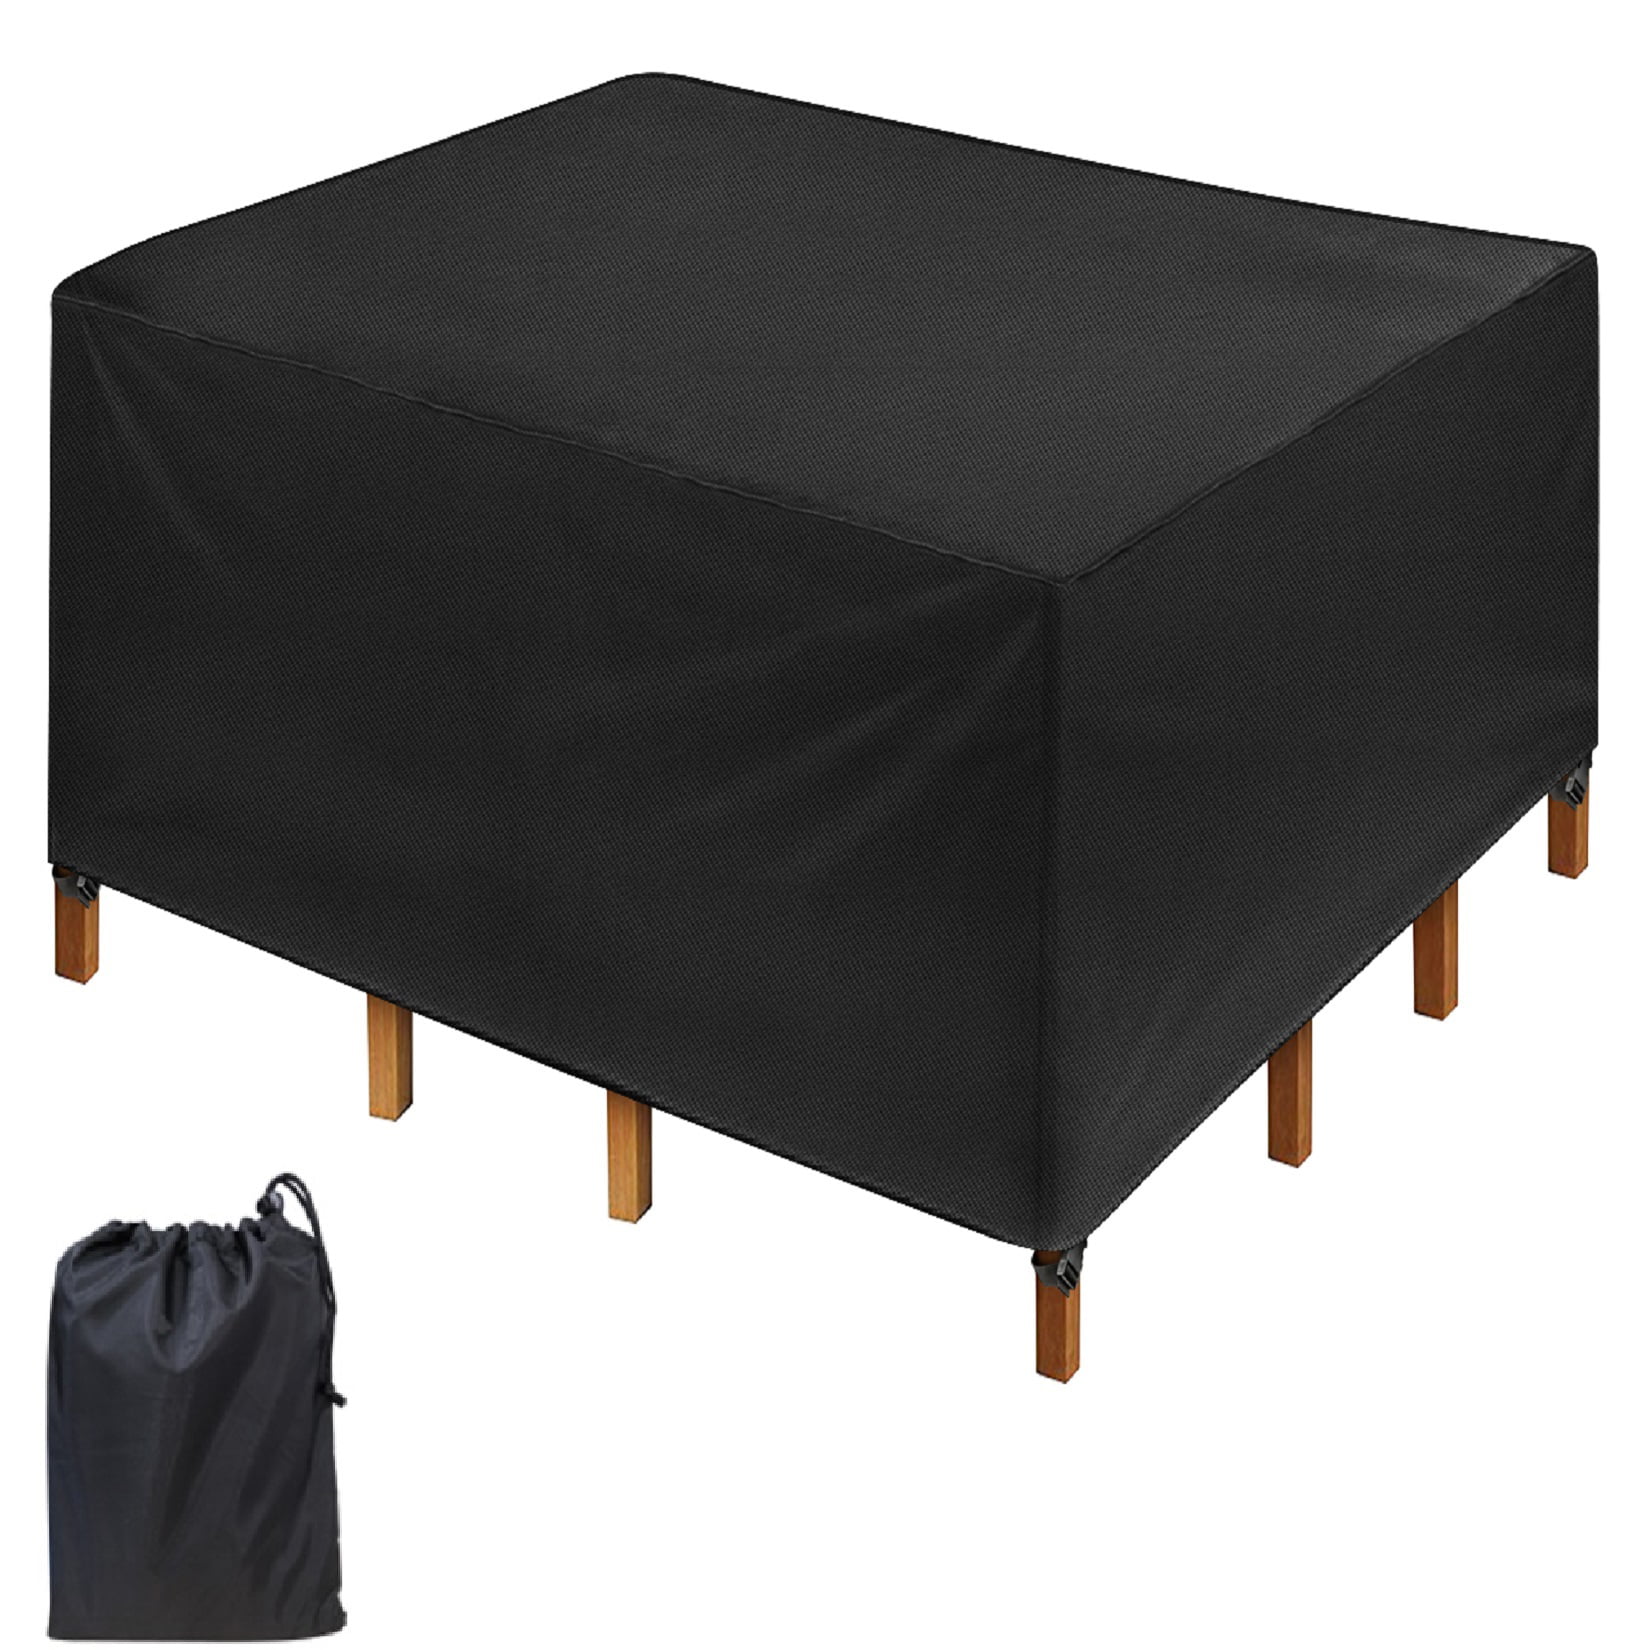 Square outdoor table cover